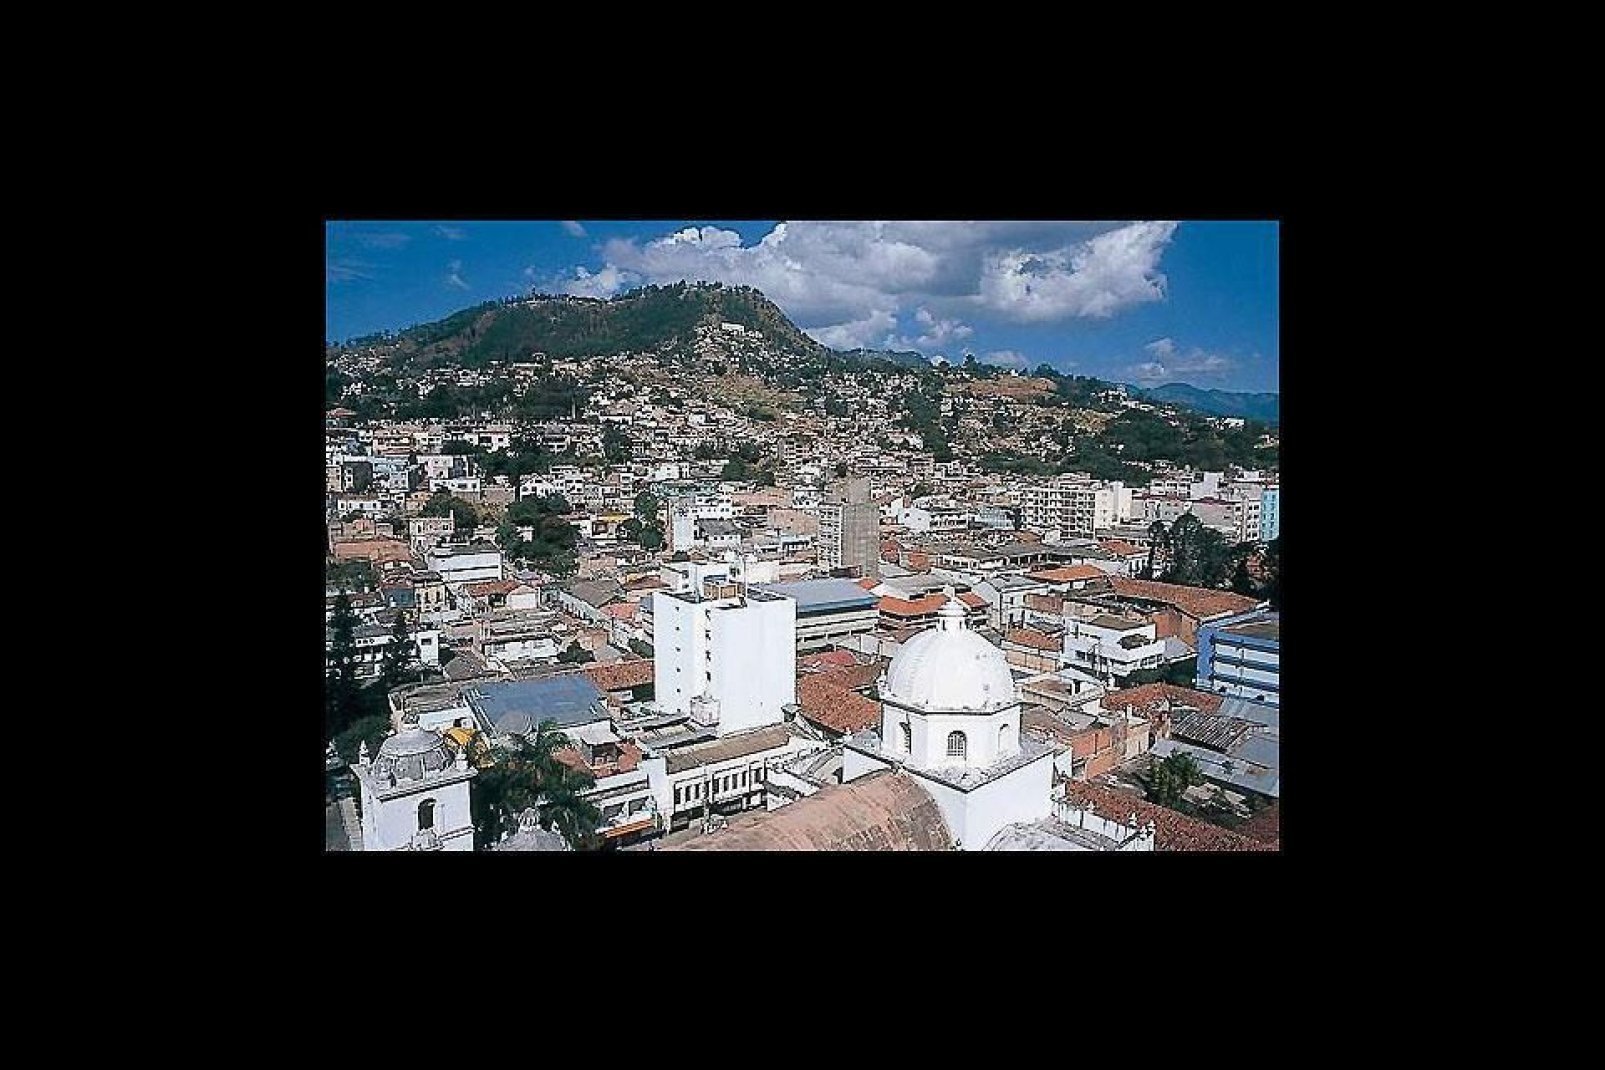 Tegucigalpa is the capital of Honduras. It has a small historic centre but overall remains a rather poor city.